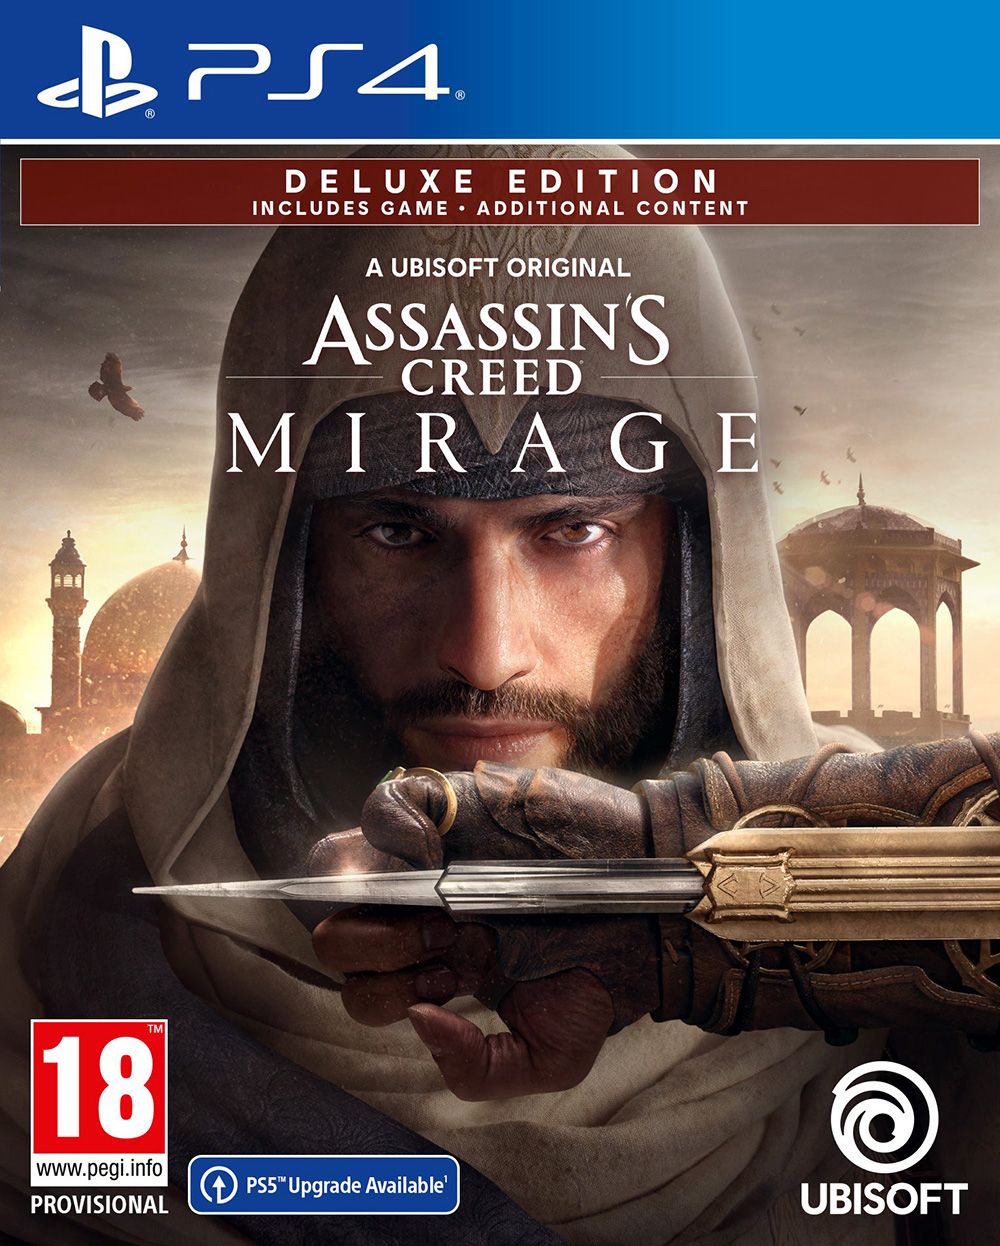 Assassin's Creed: Mirage - Deluxe Edition (PS4) | PlayStation 4